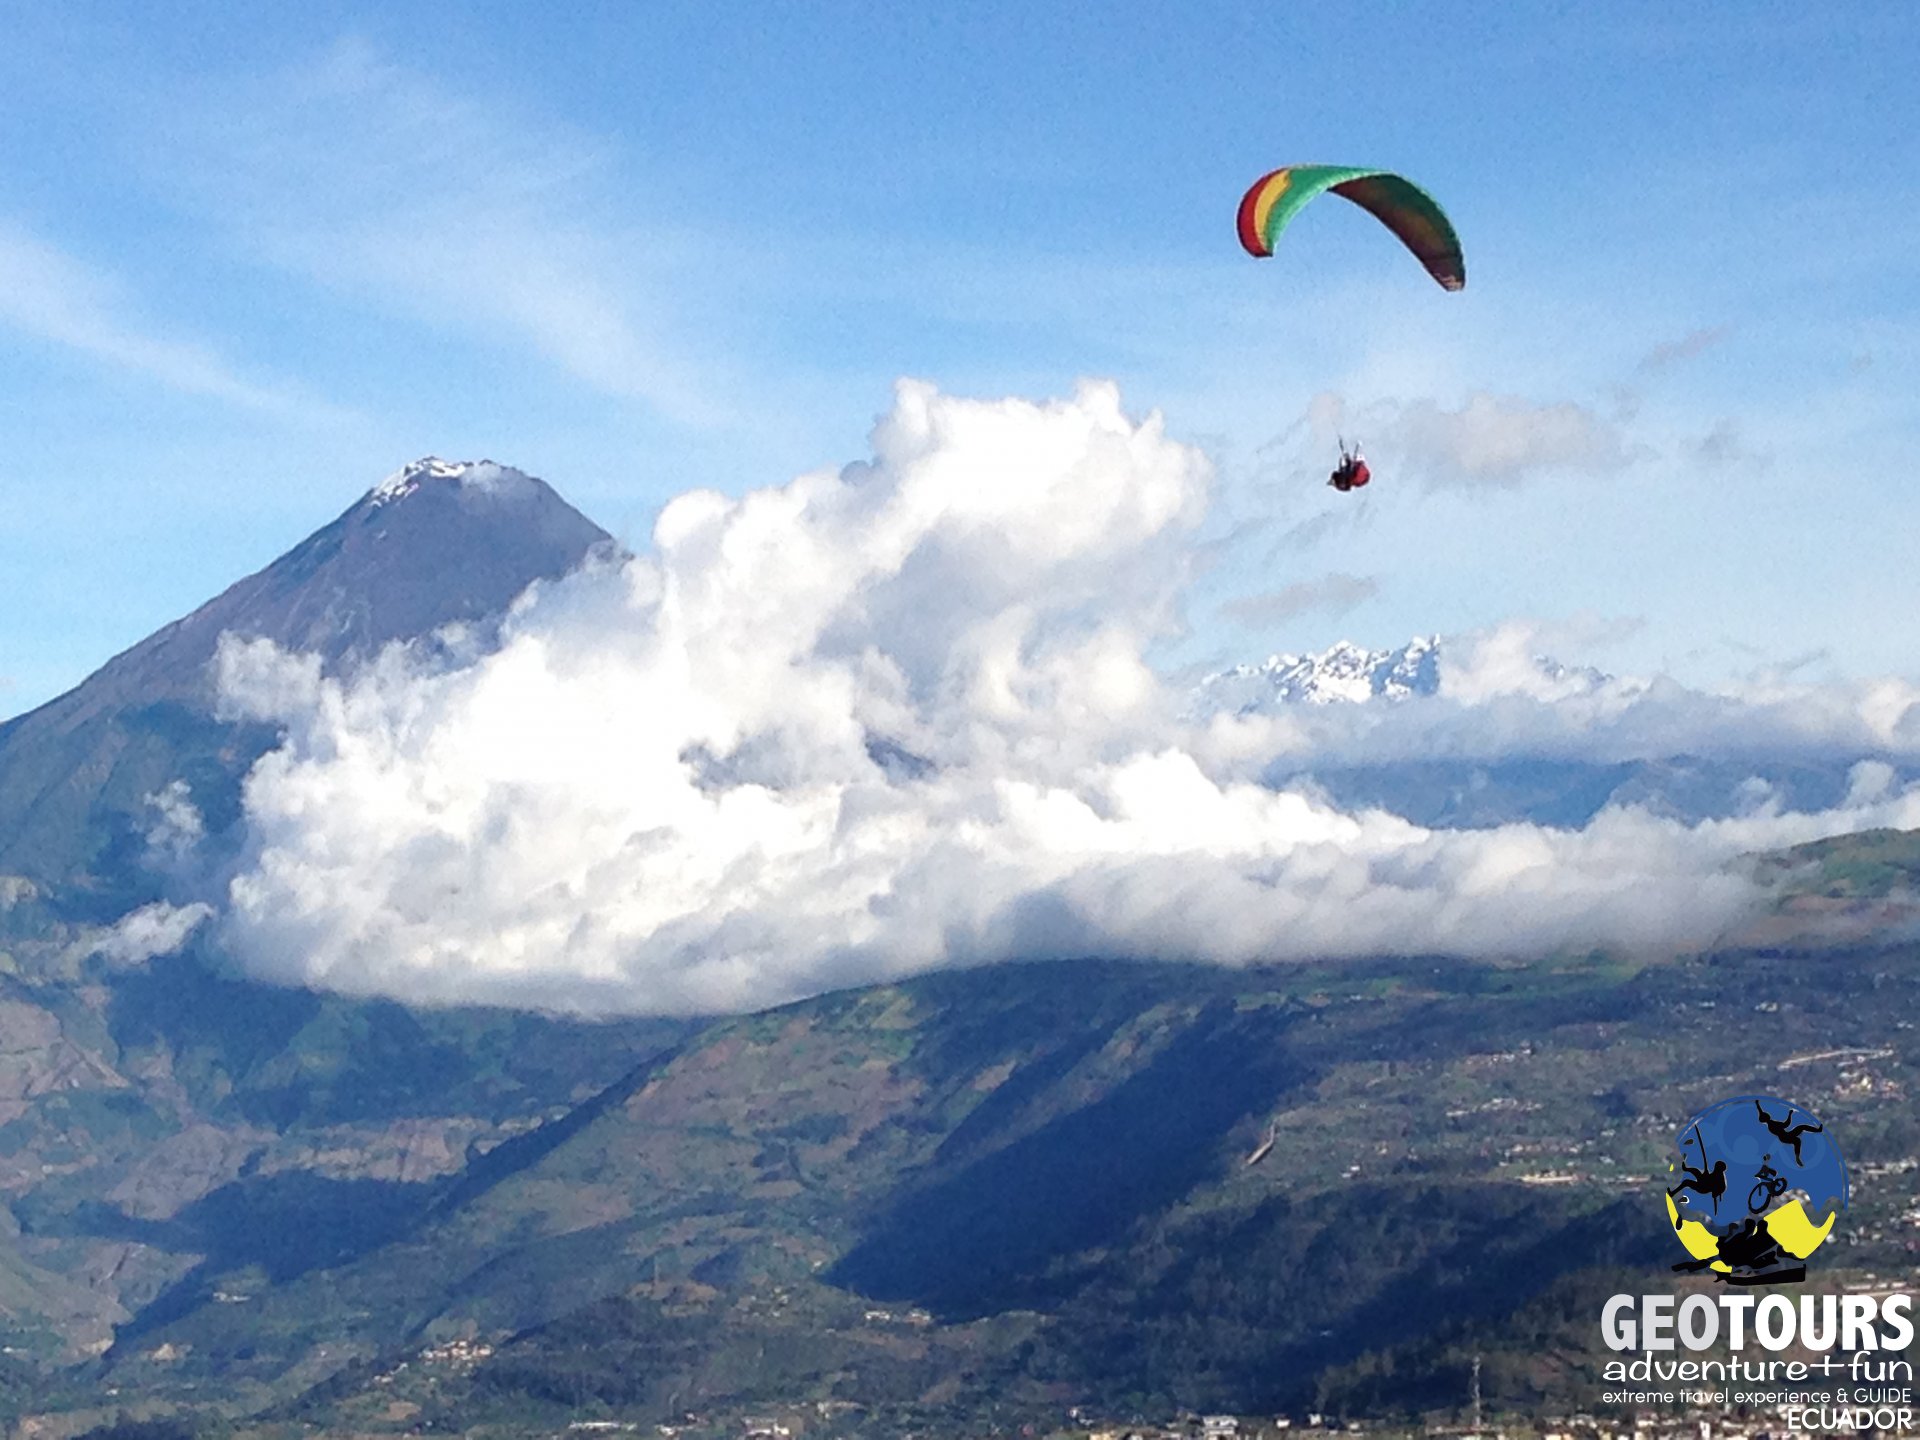 What volcanoes can I see on the paragliding tour?